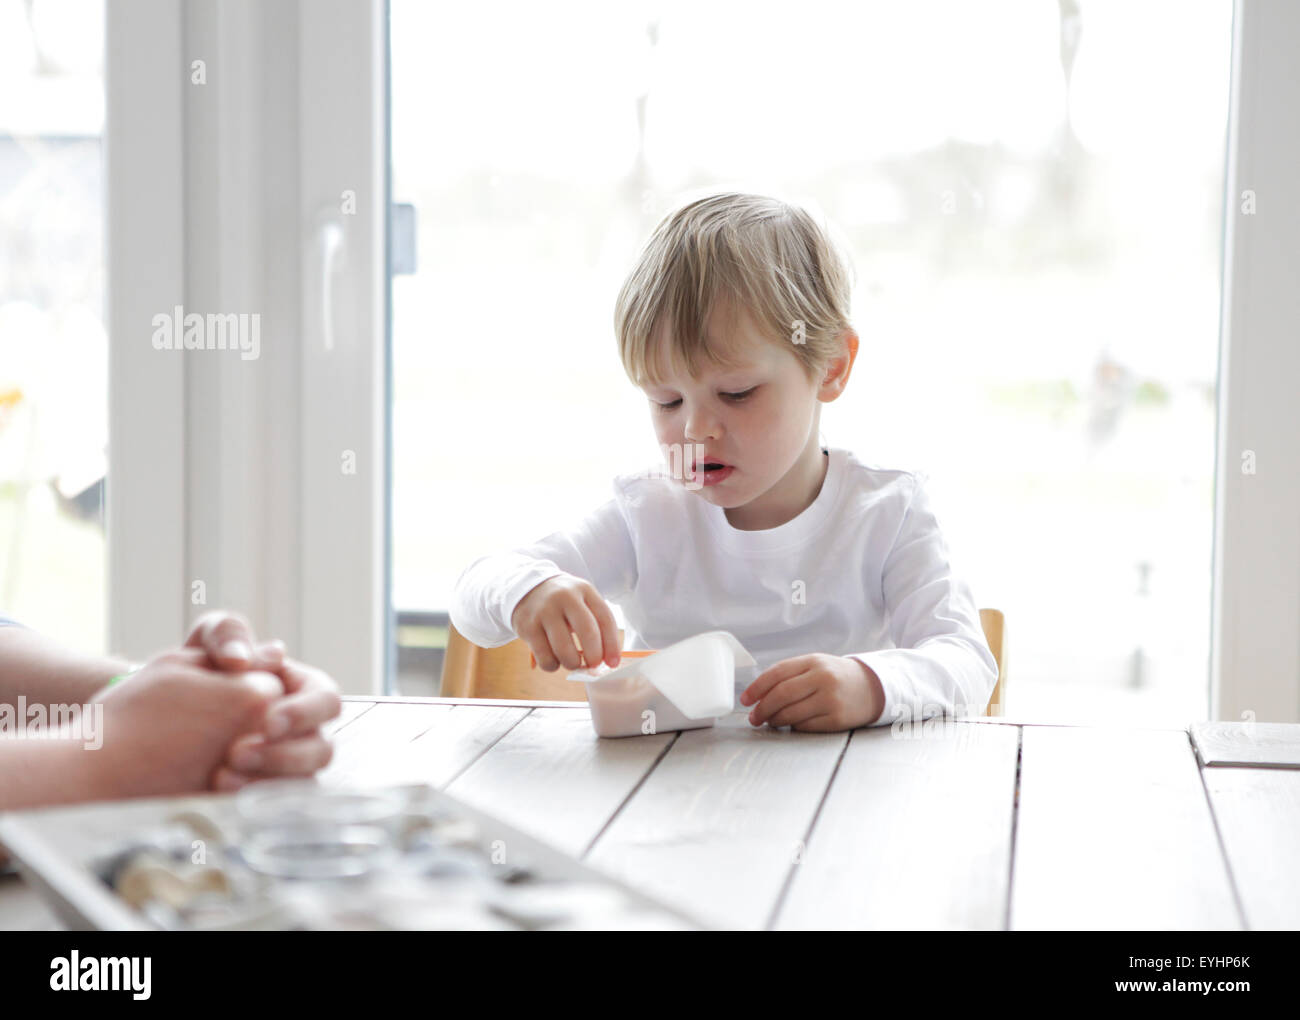 a little boy sitting at the kitchen table, eating yogurt with a spoon Stock Photo